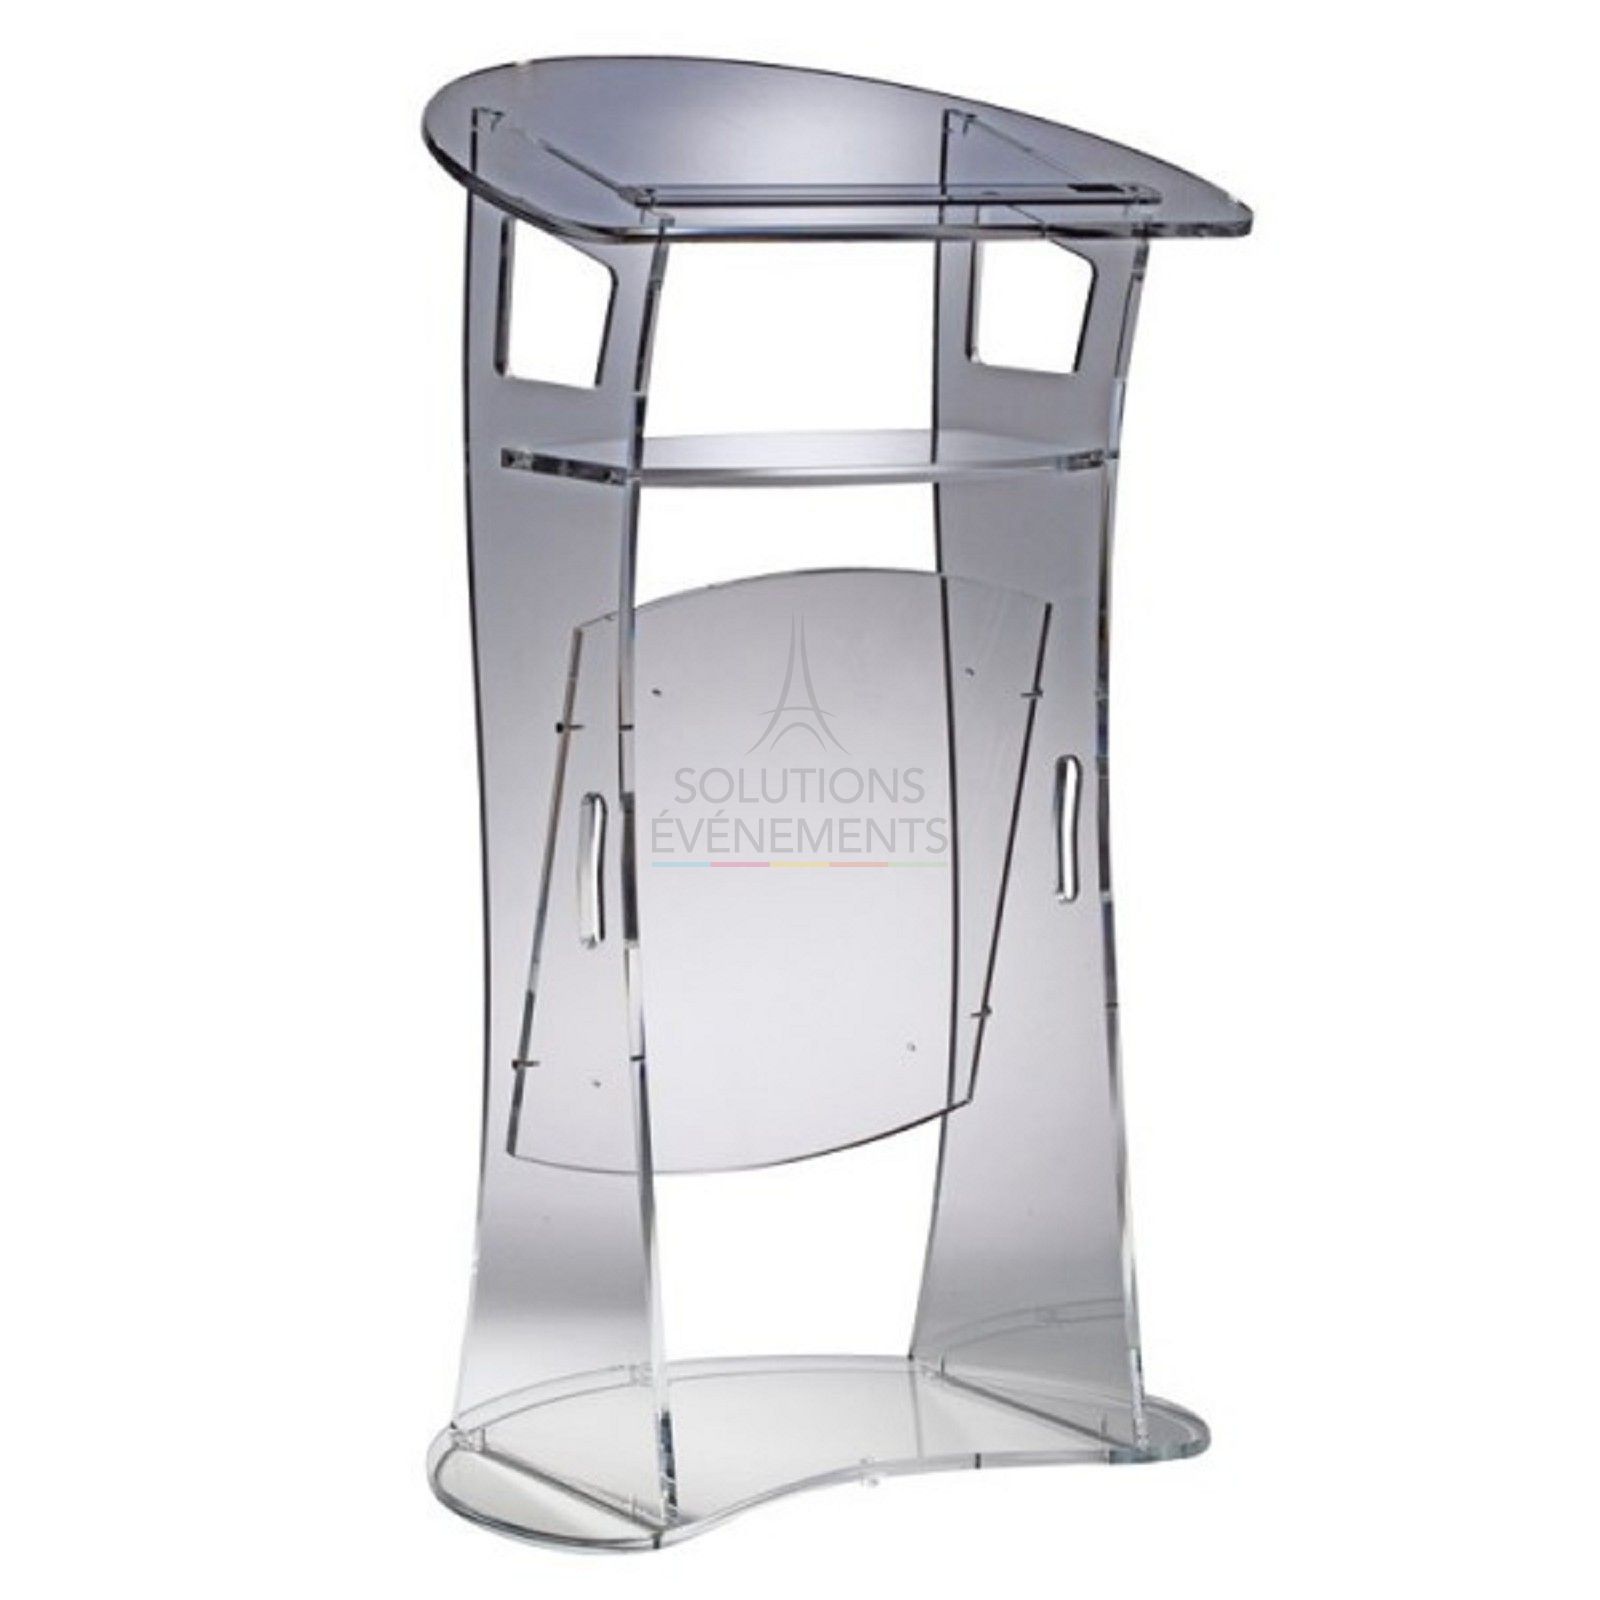 Plexiglass lectern rental for your conferences and seminars in Paris.